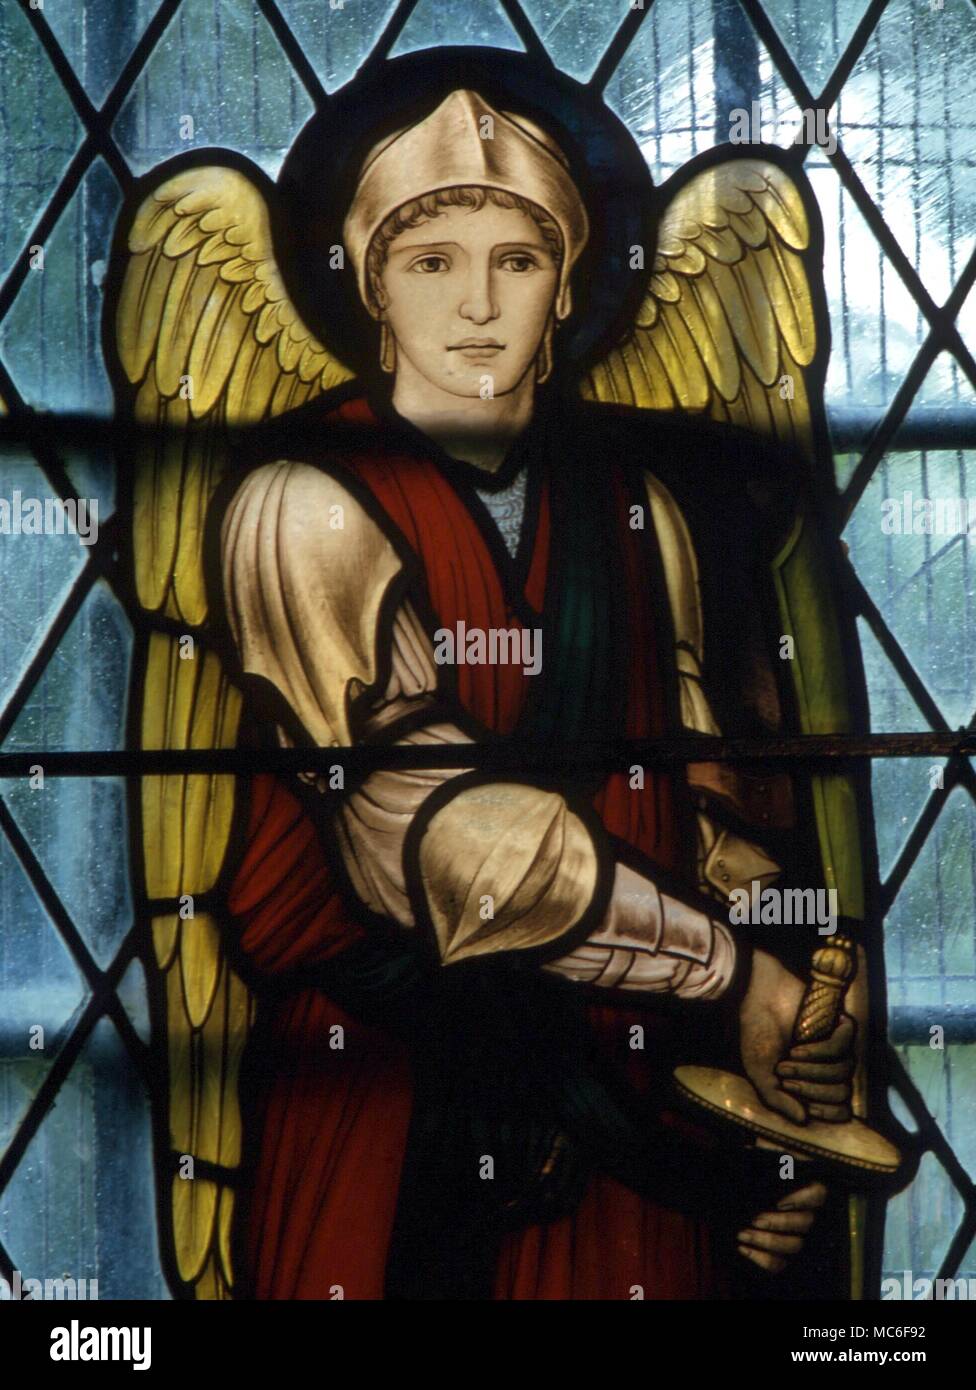 SAINTS - Head of the archangel St Michael, from the stained glass in Chaldon Church, Surrey. 19th century stained glass Stock Photo